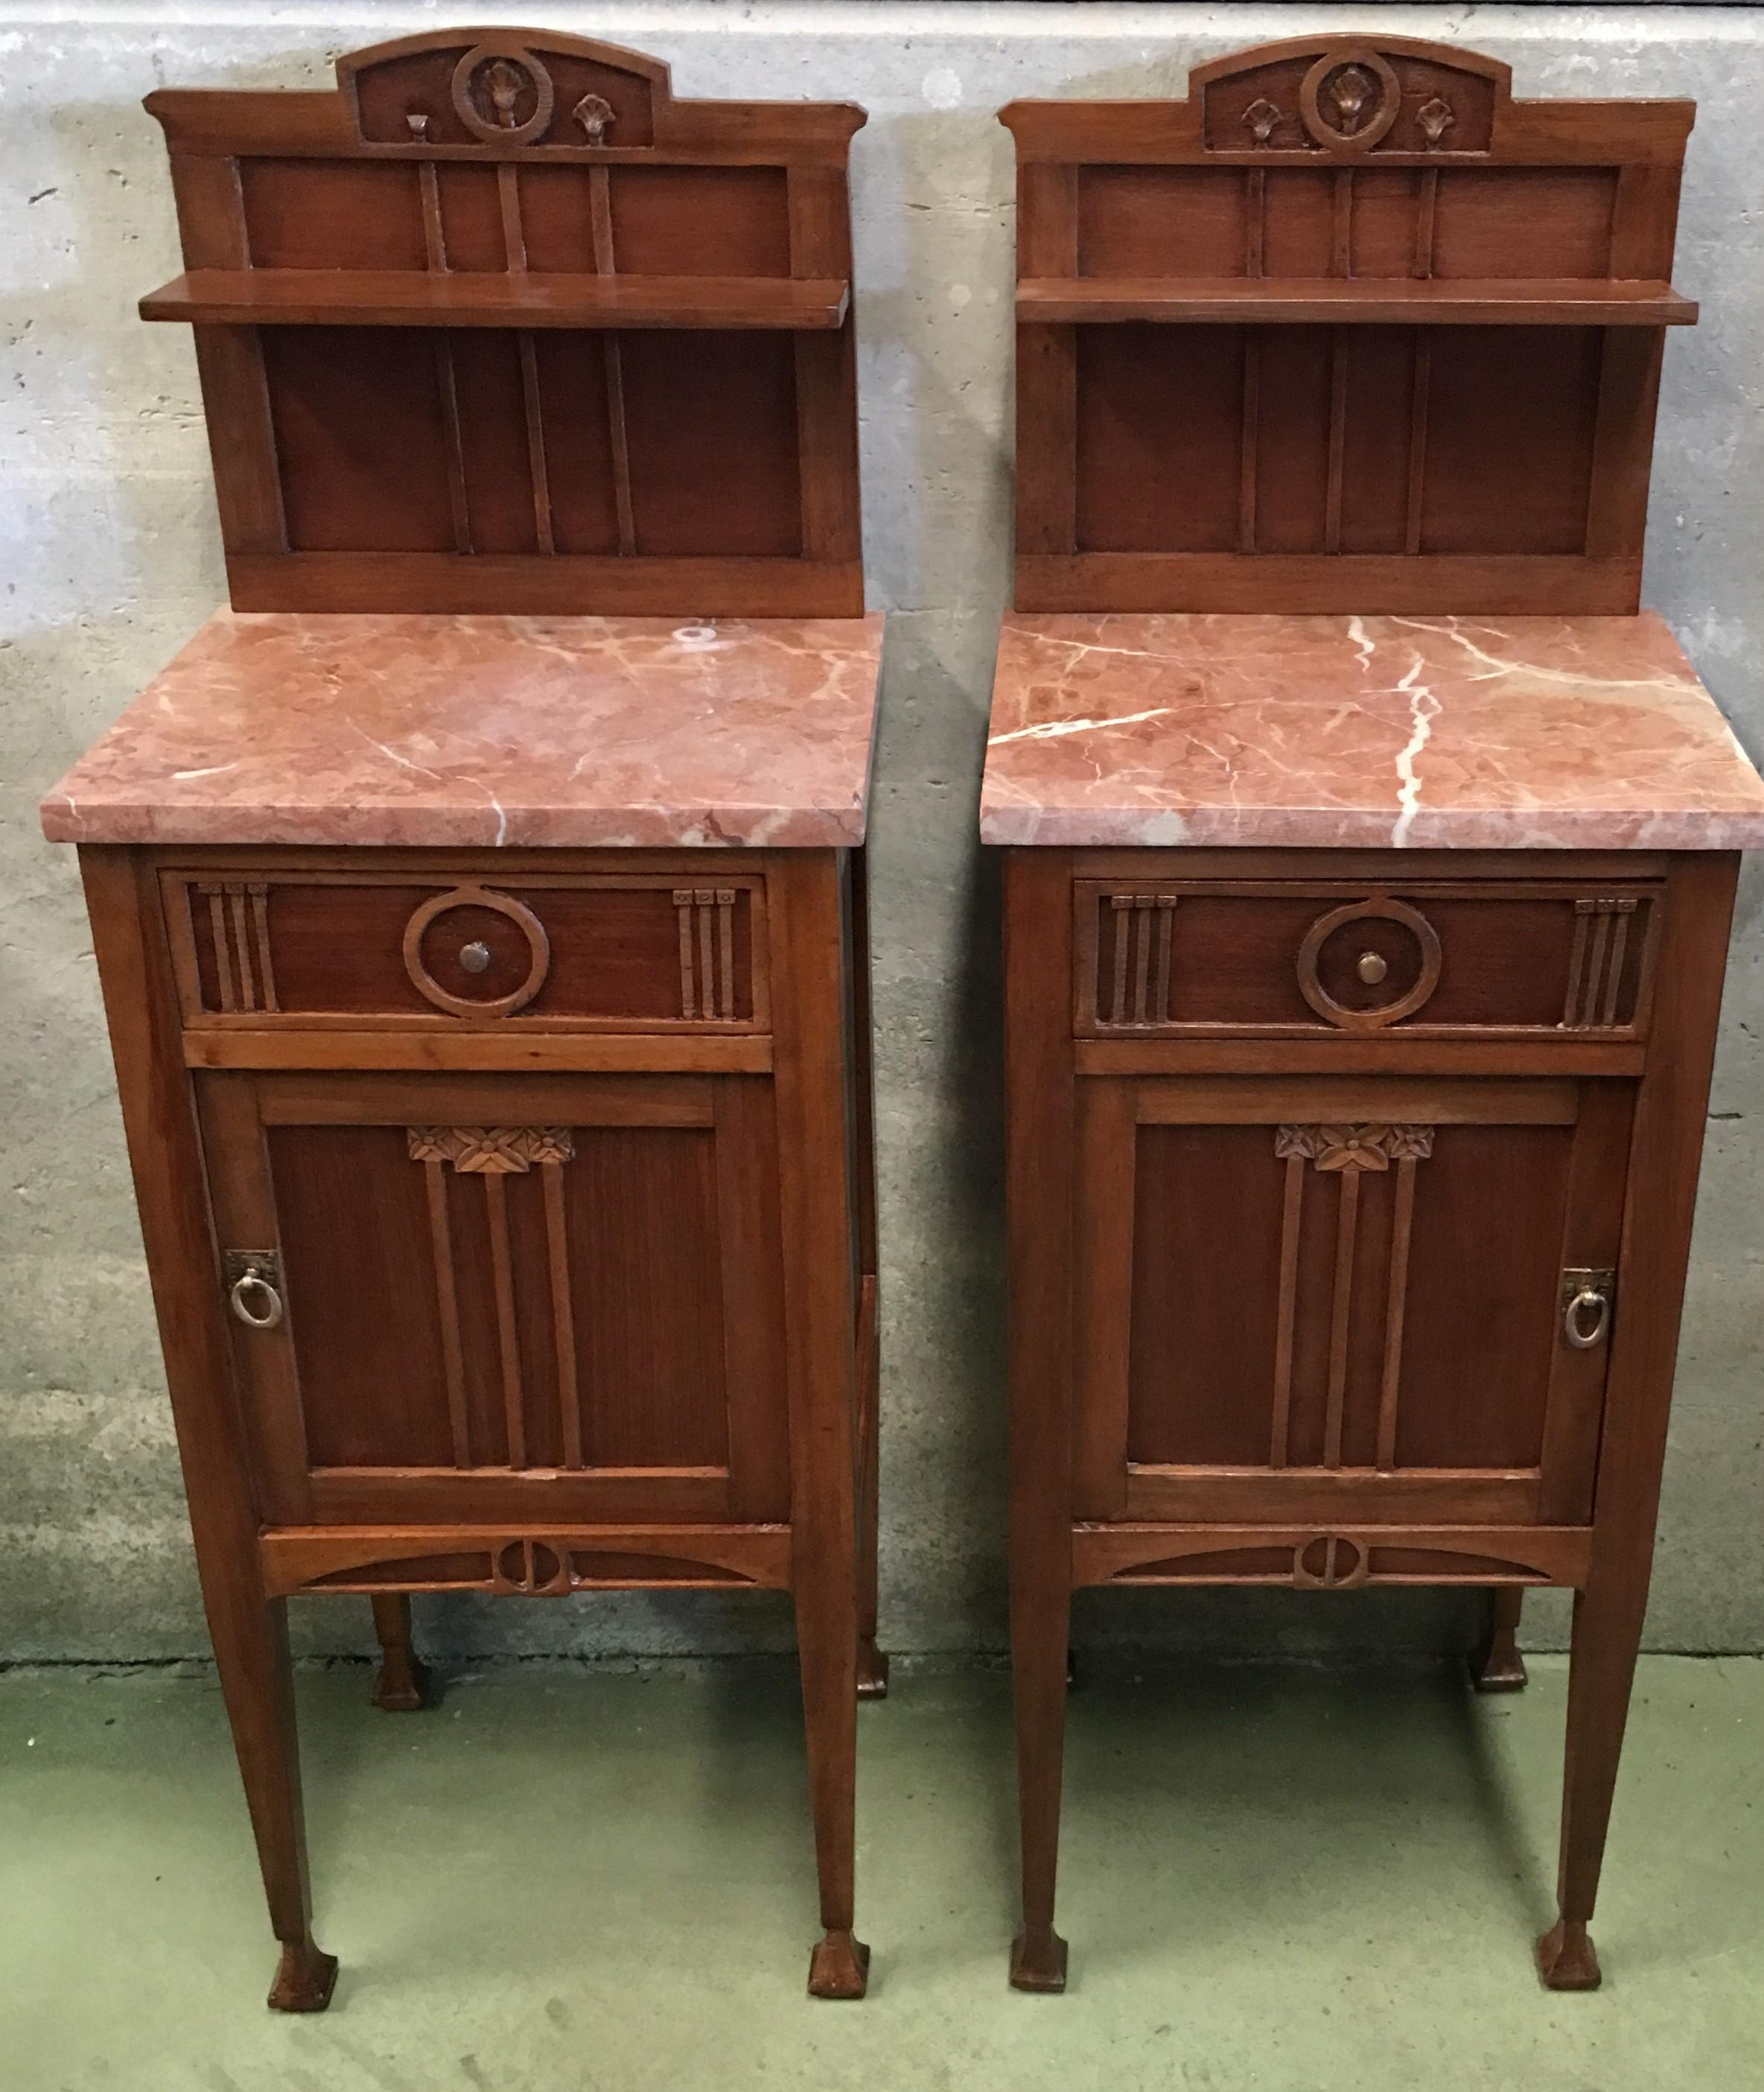 1900s, Art Nouveau Pair of Nightstands in Mahogany Top in Marble (Art nouveau)